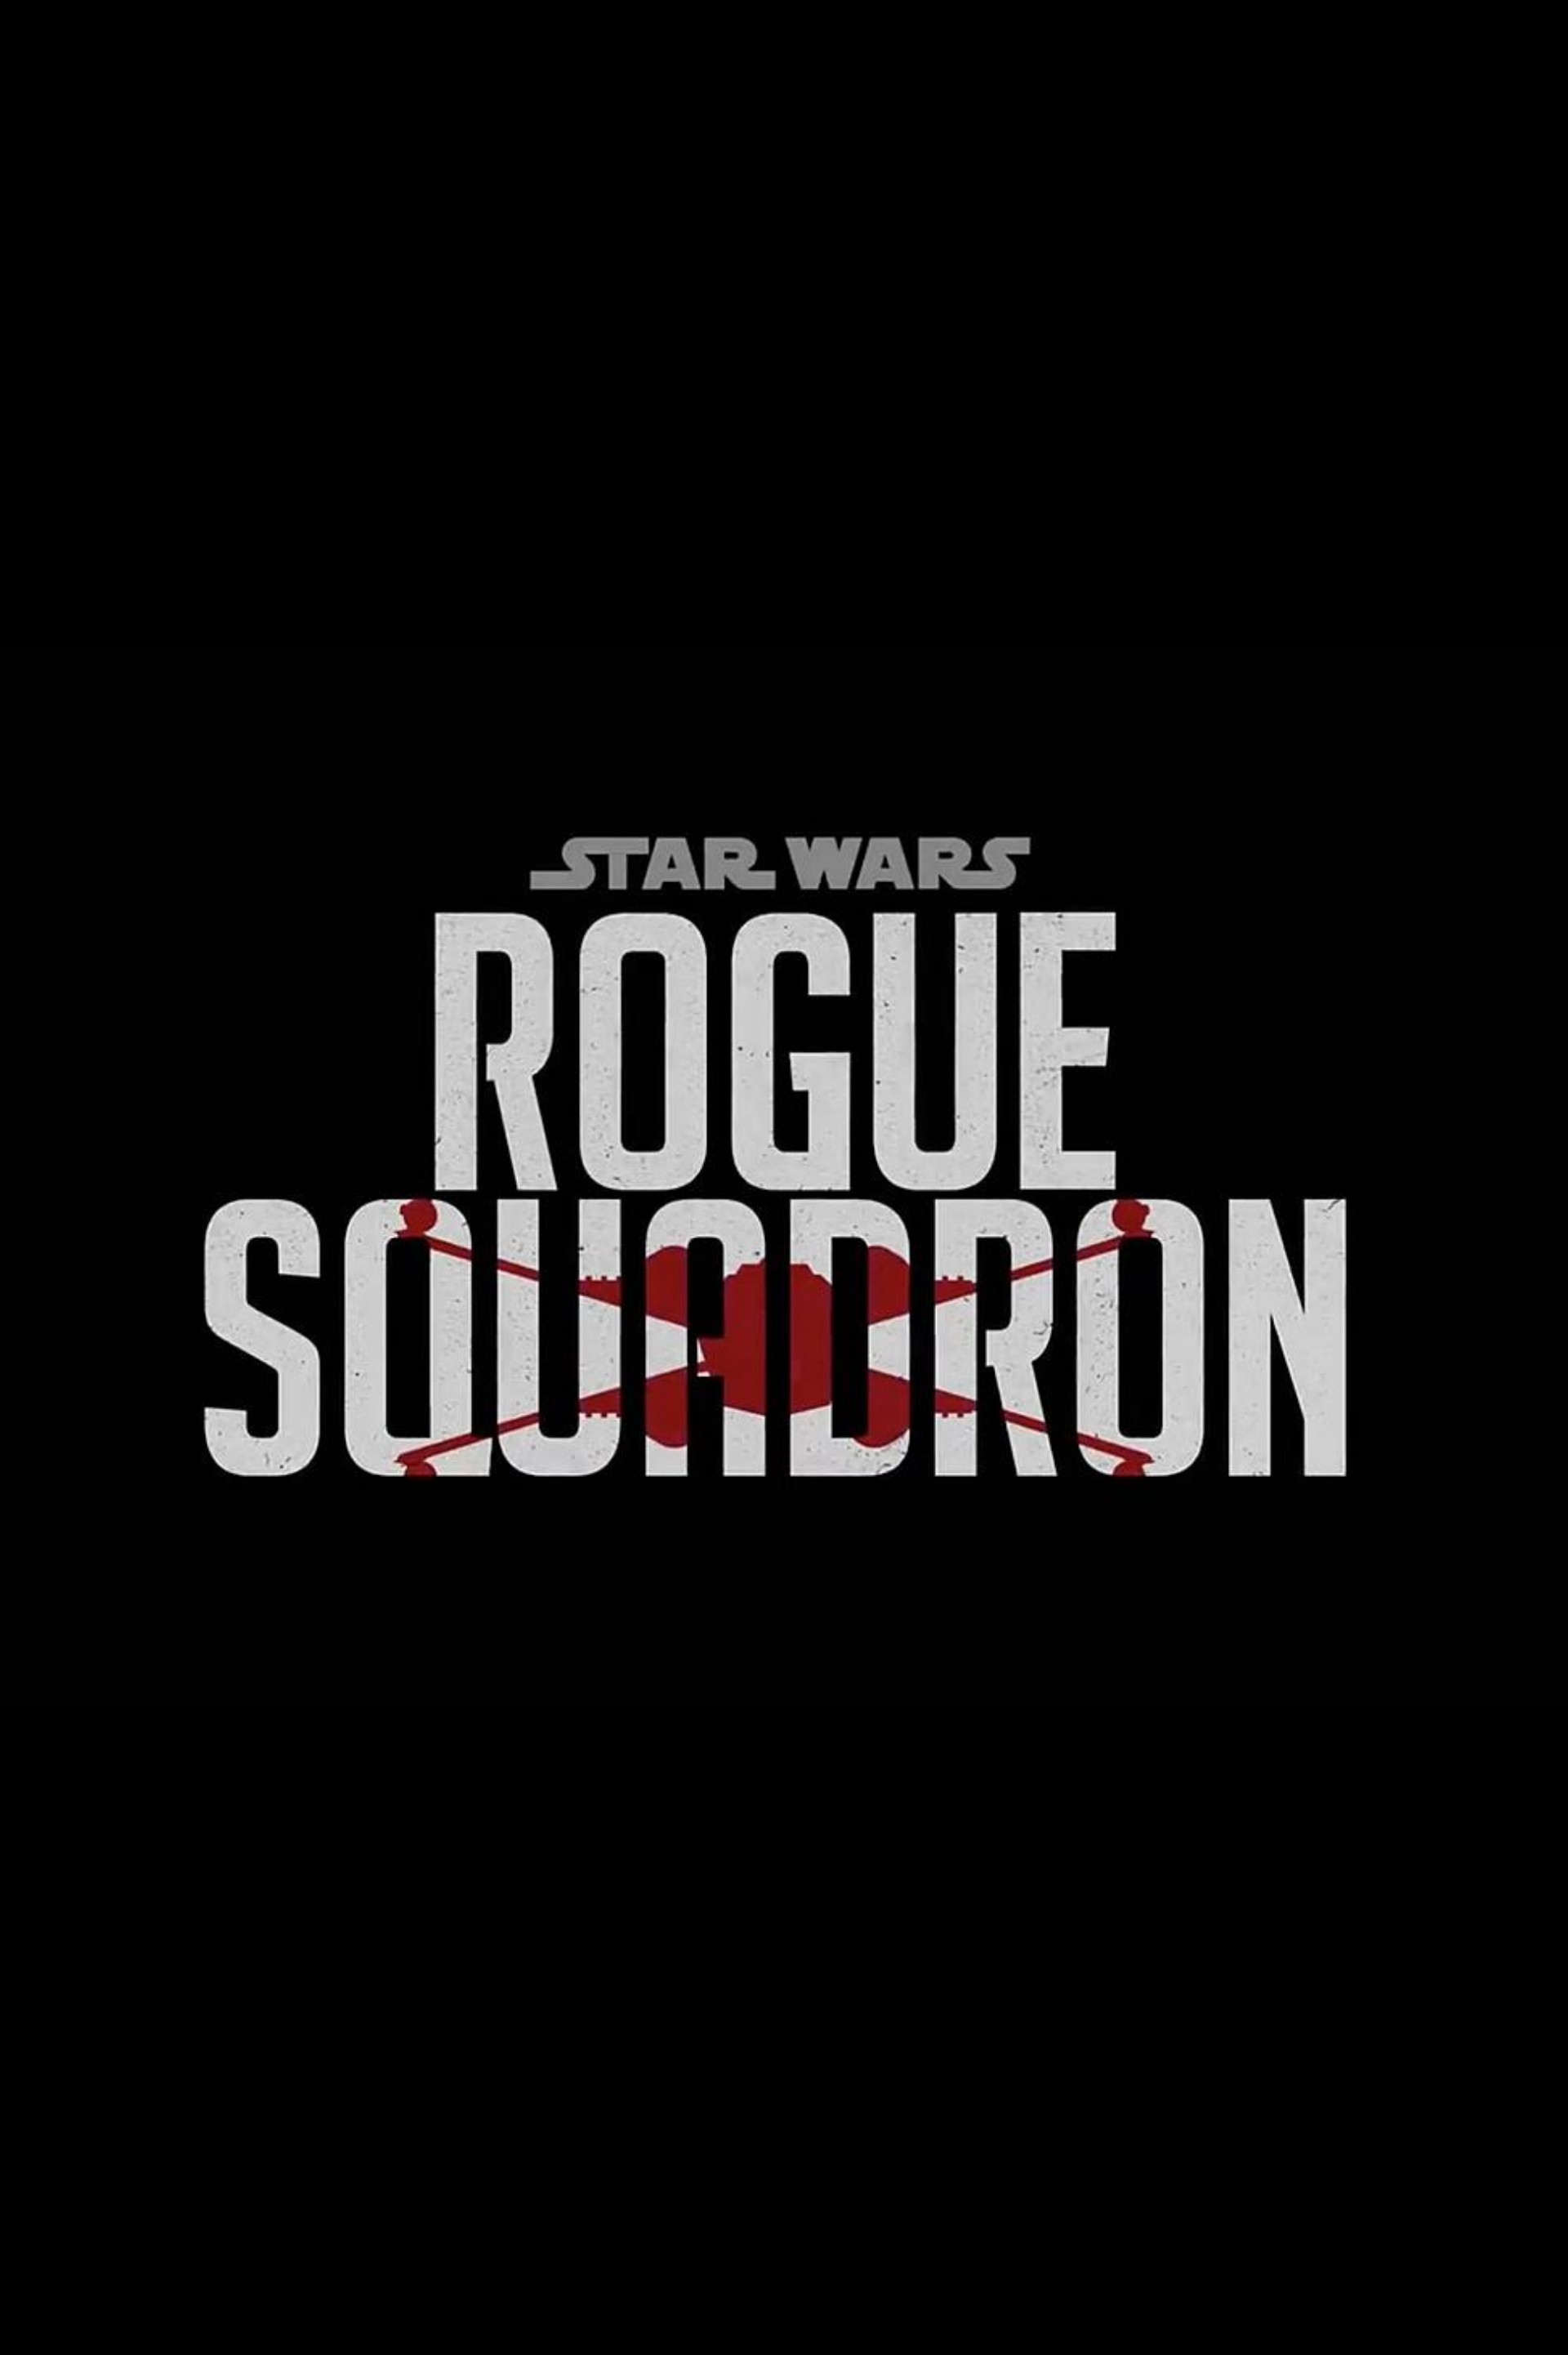 What is Star Wars: Rogue Squadron release date?